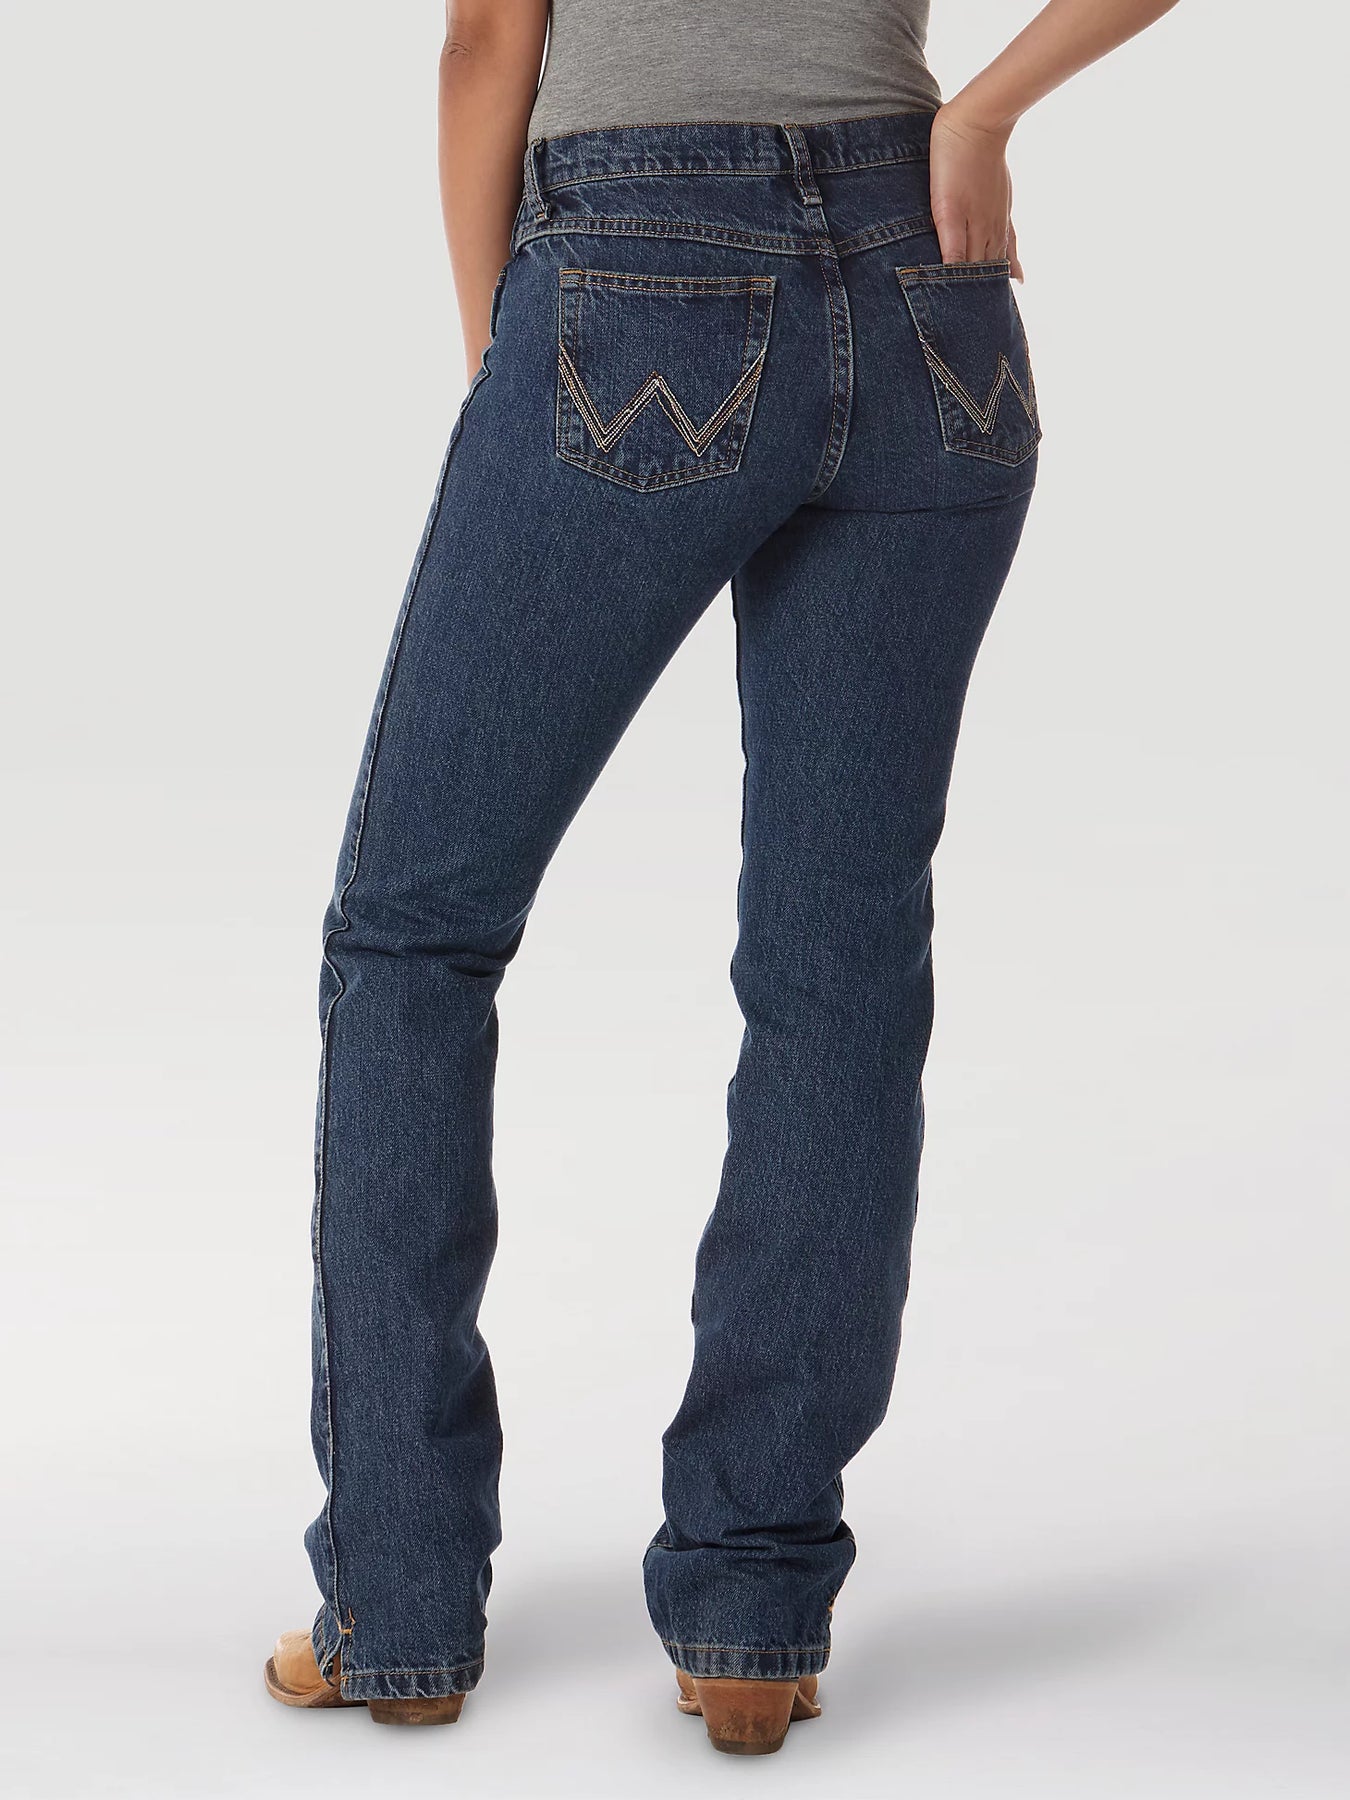 WRANGLER LADIES CASH MID-RISE JEANS - WRC10AS34 – Sheps Outfitters